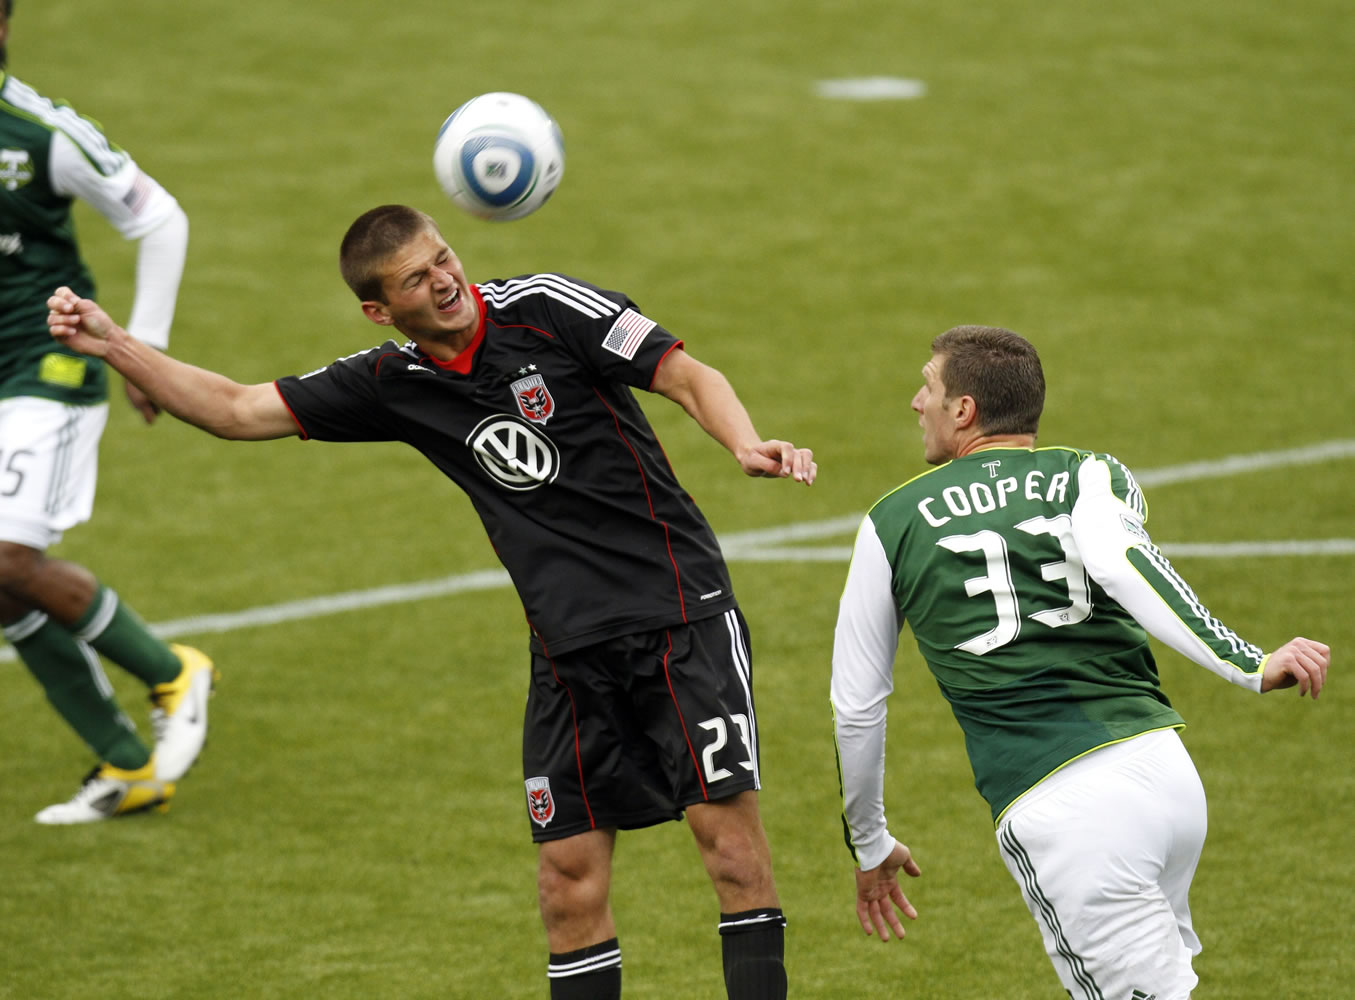 DC United defender Perry Kitchen, left, heads the ball over Portland Timbers forward Kenny Cooper during the first half Sunday at Jeld-Wen Field.